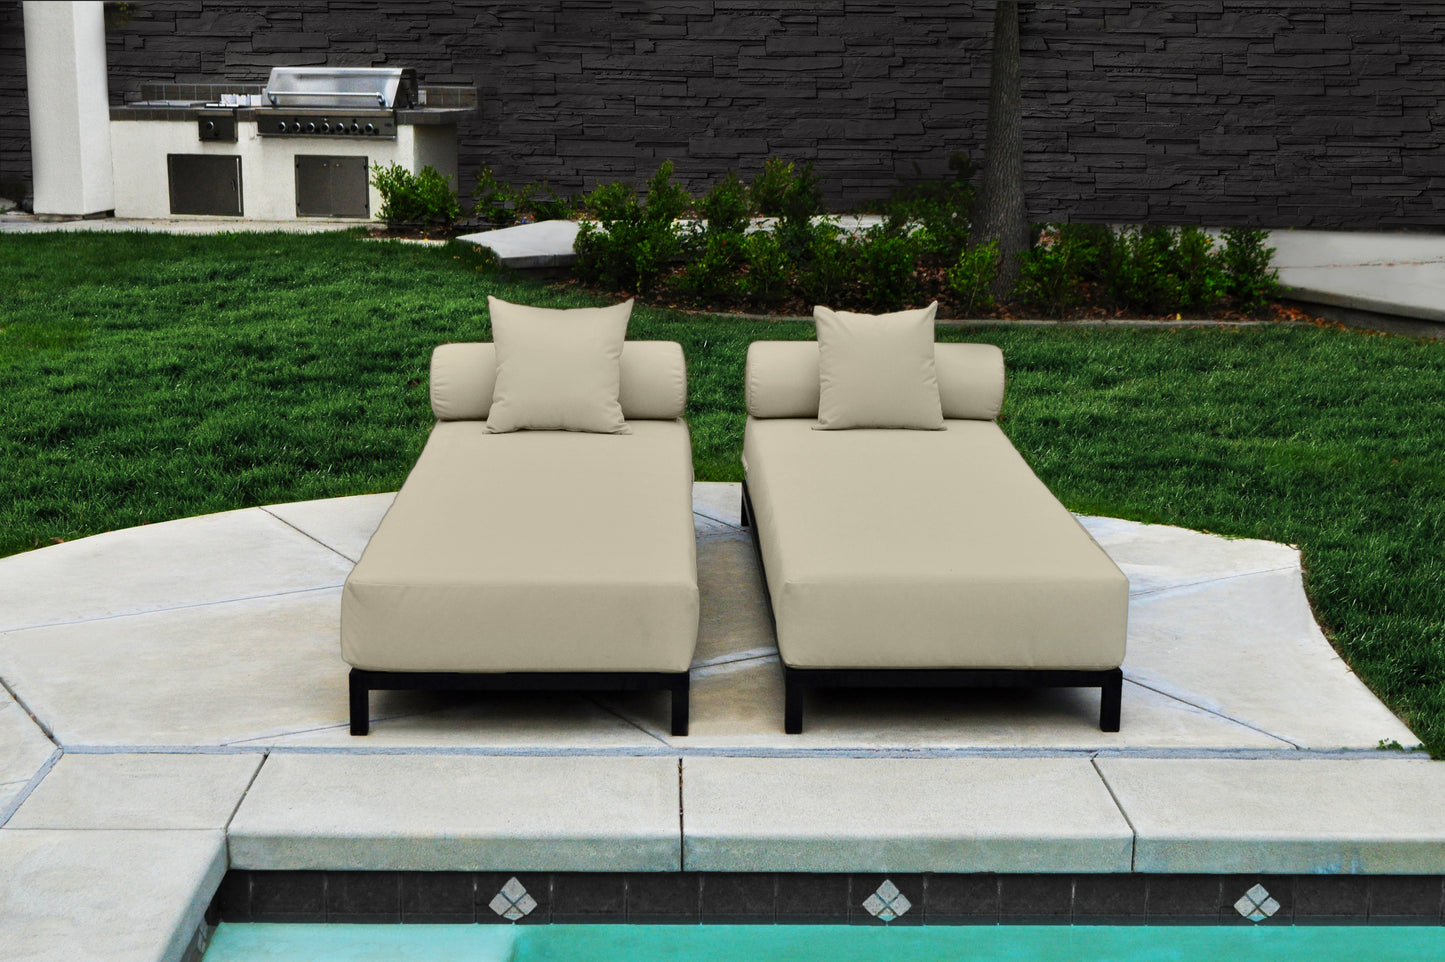 Volantes Outdoor Beige Chaise Loungers (Set of 3)